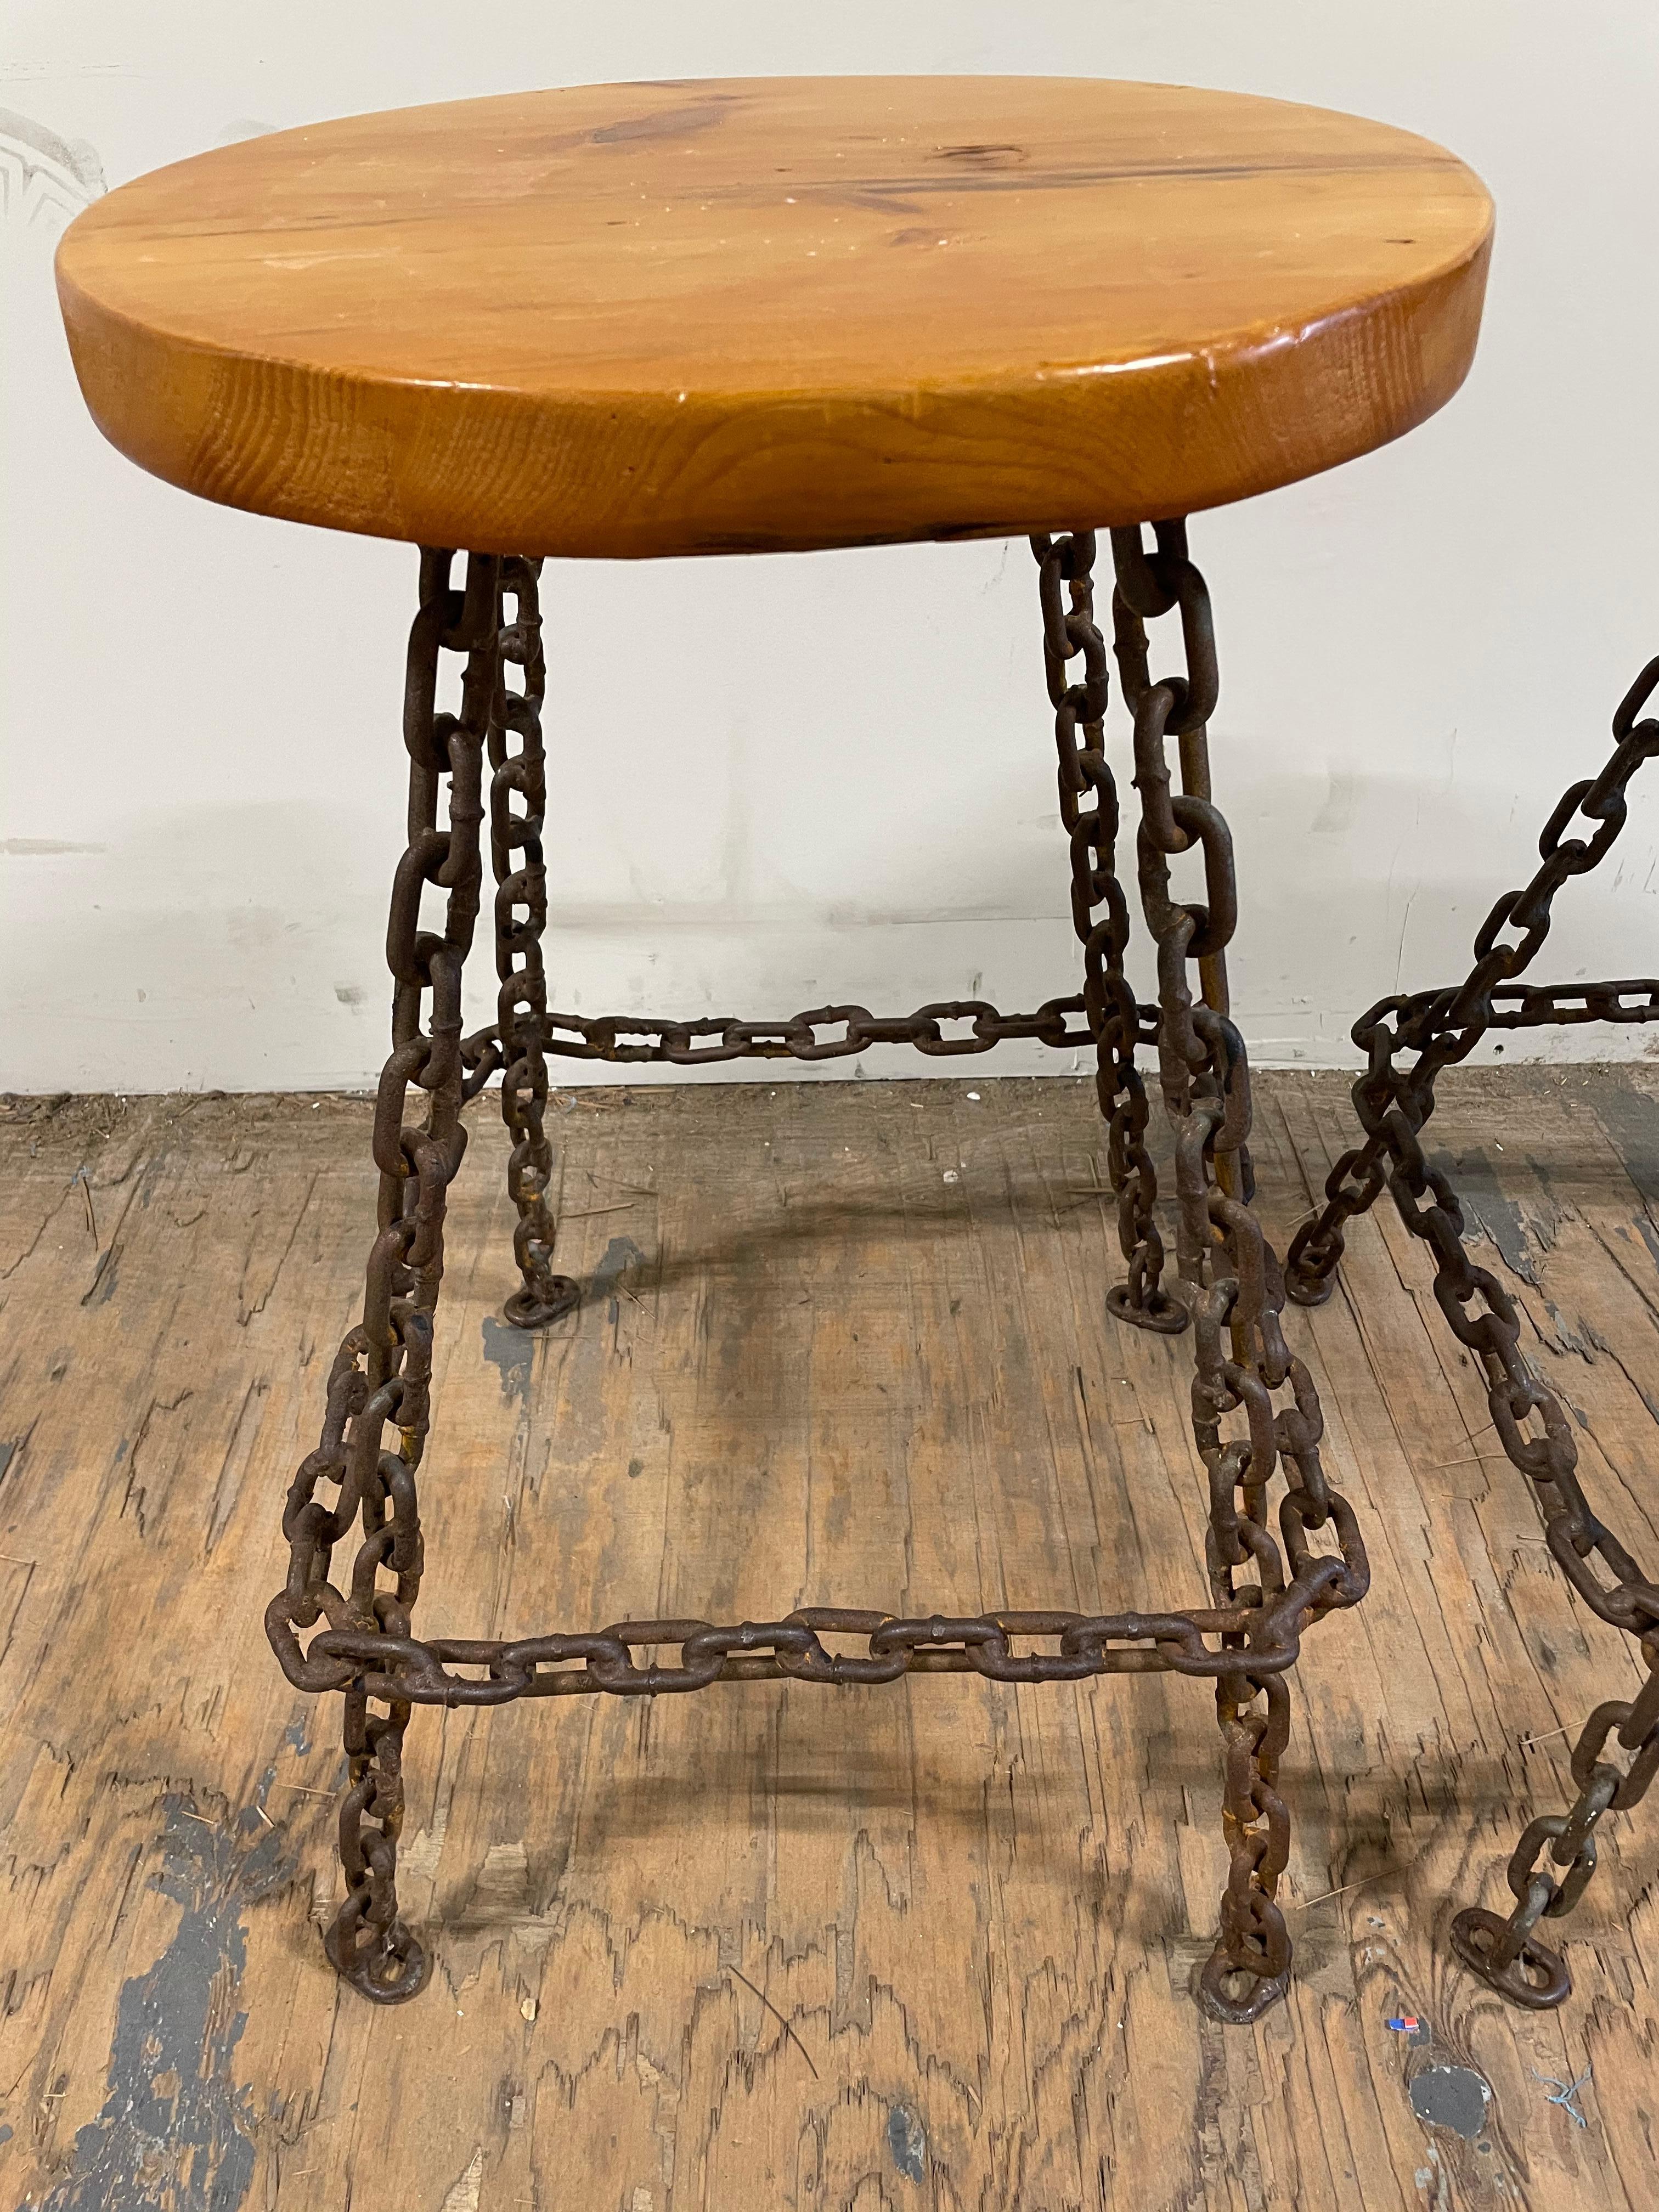 Set of 4 Brutalist Welded Marine Chain and Wood Bar Stools - 1970's In Good Condition For Sale In W Allenhurst, NJ